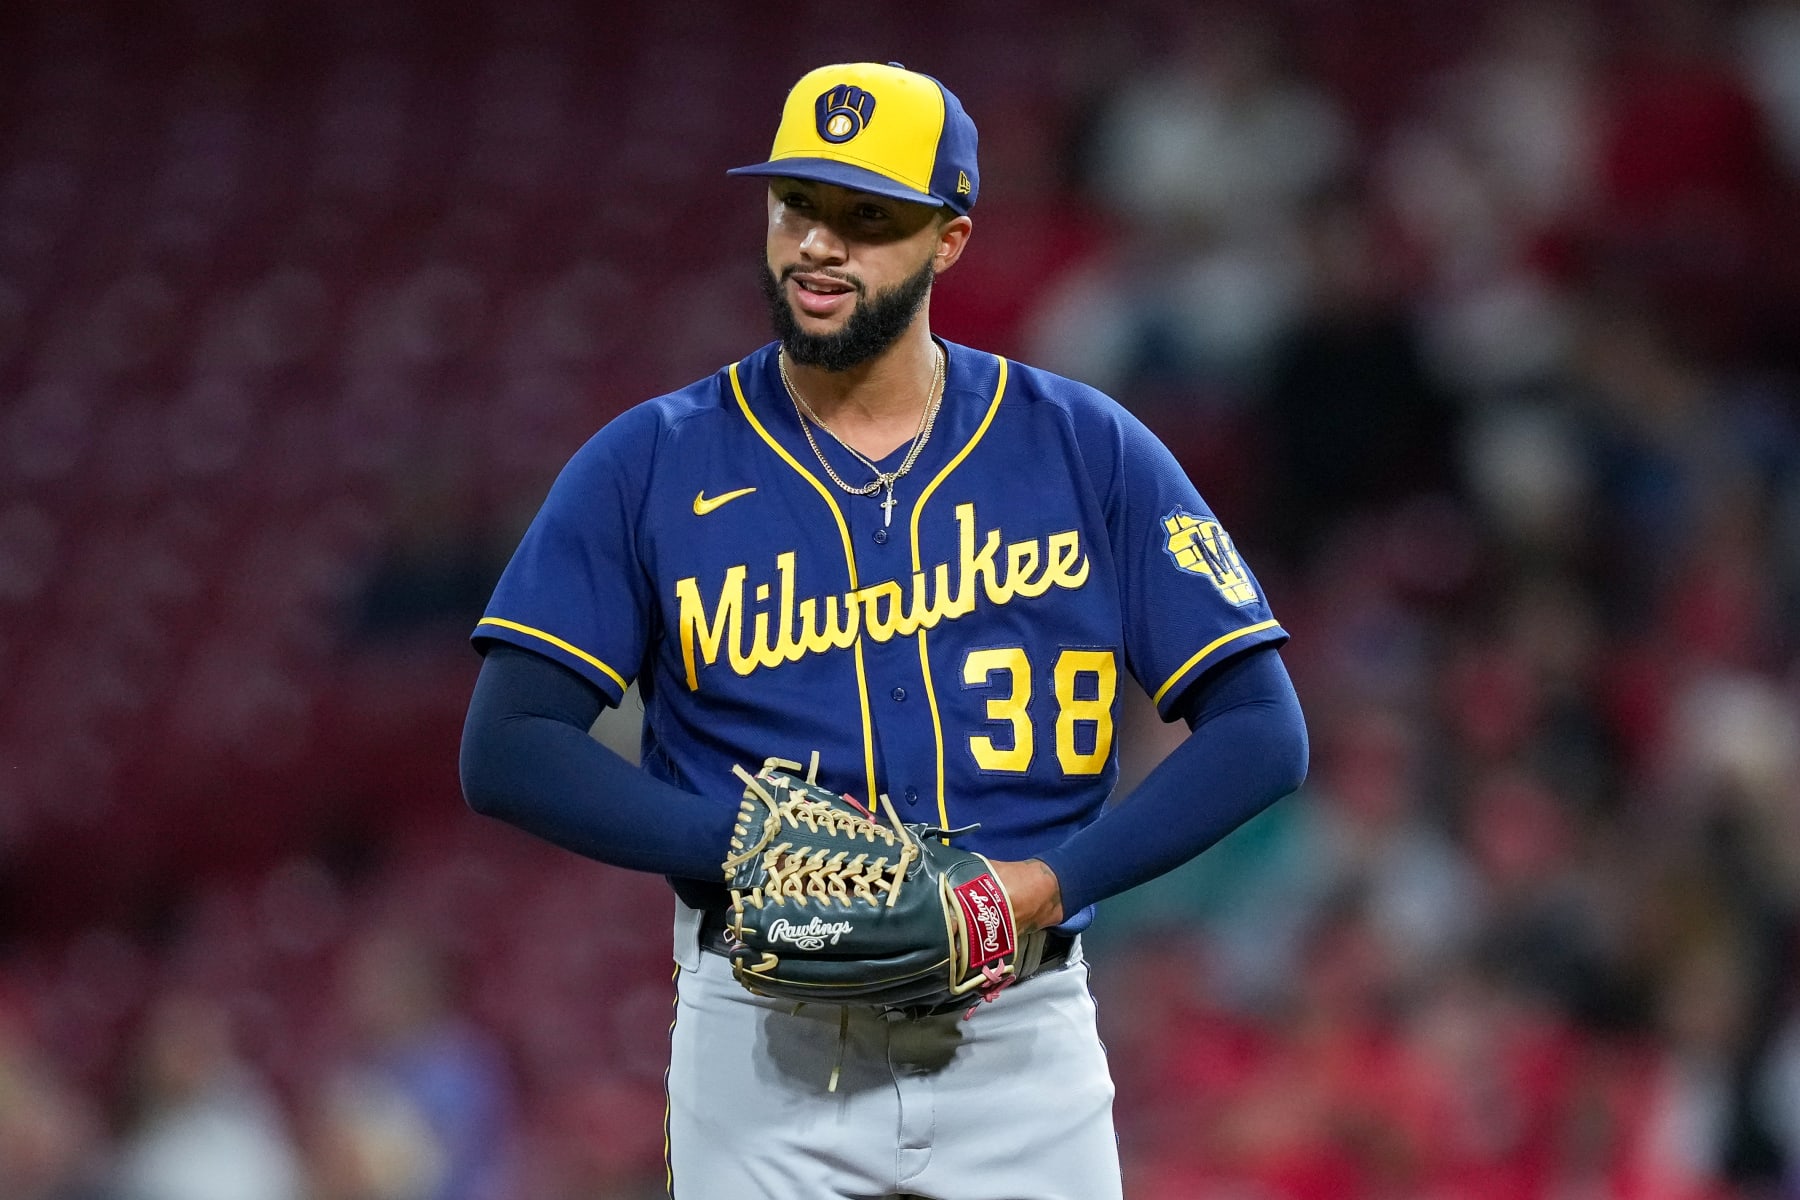 Gagne signing right move for Brewers